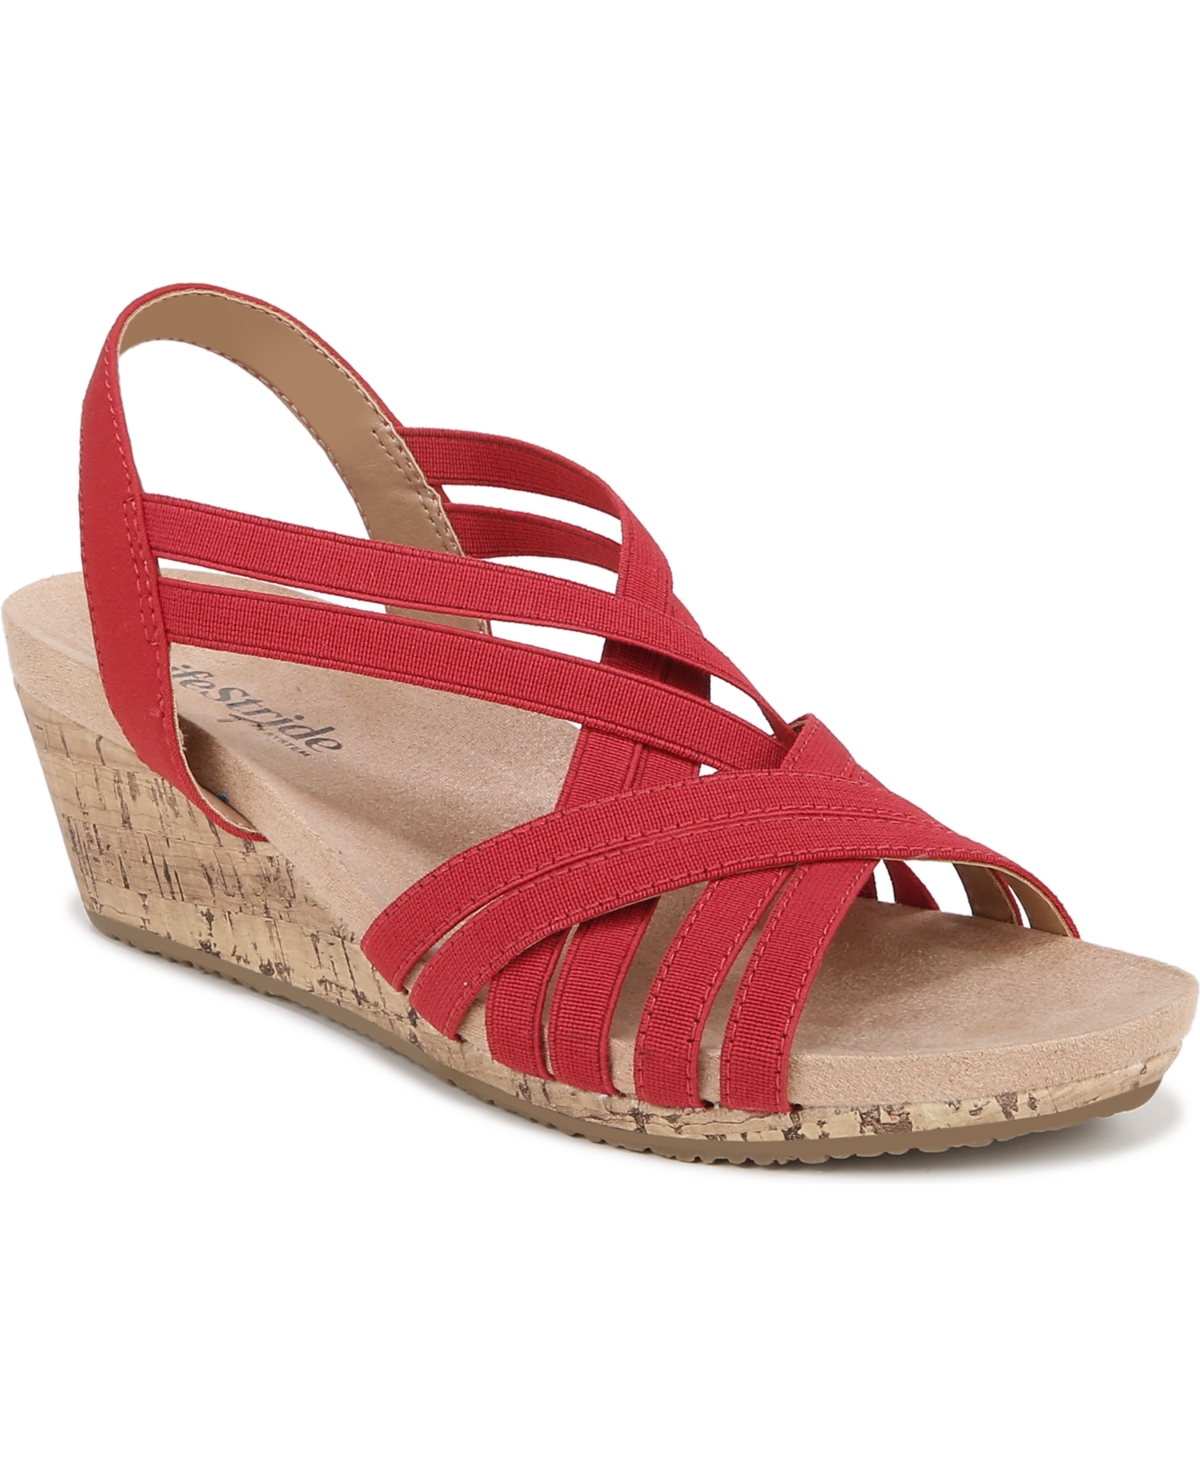 Women's Mallory Strappy Wedge Sandals - Fire Red Fabric